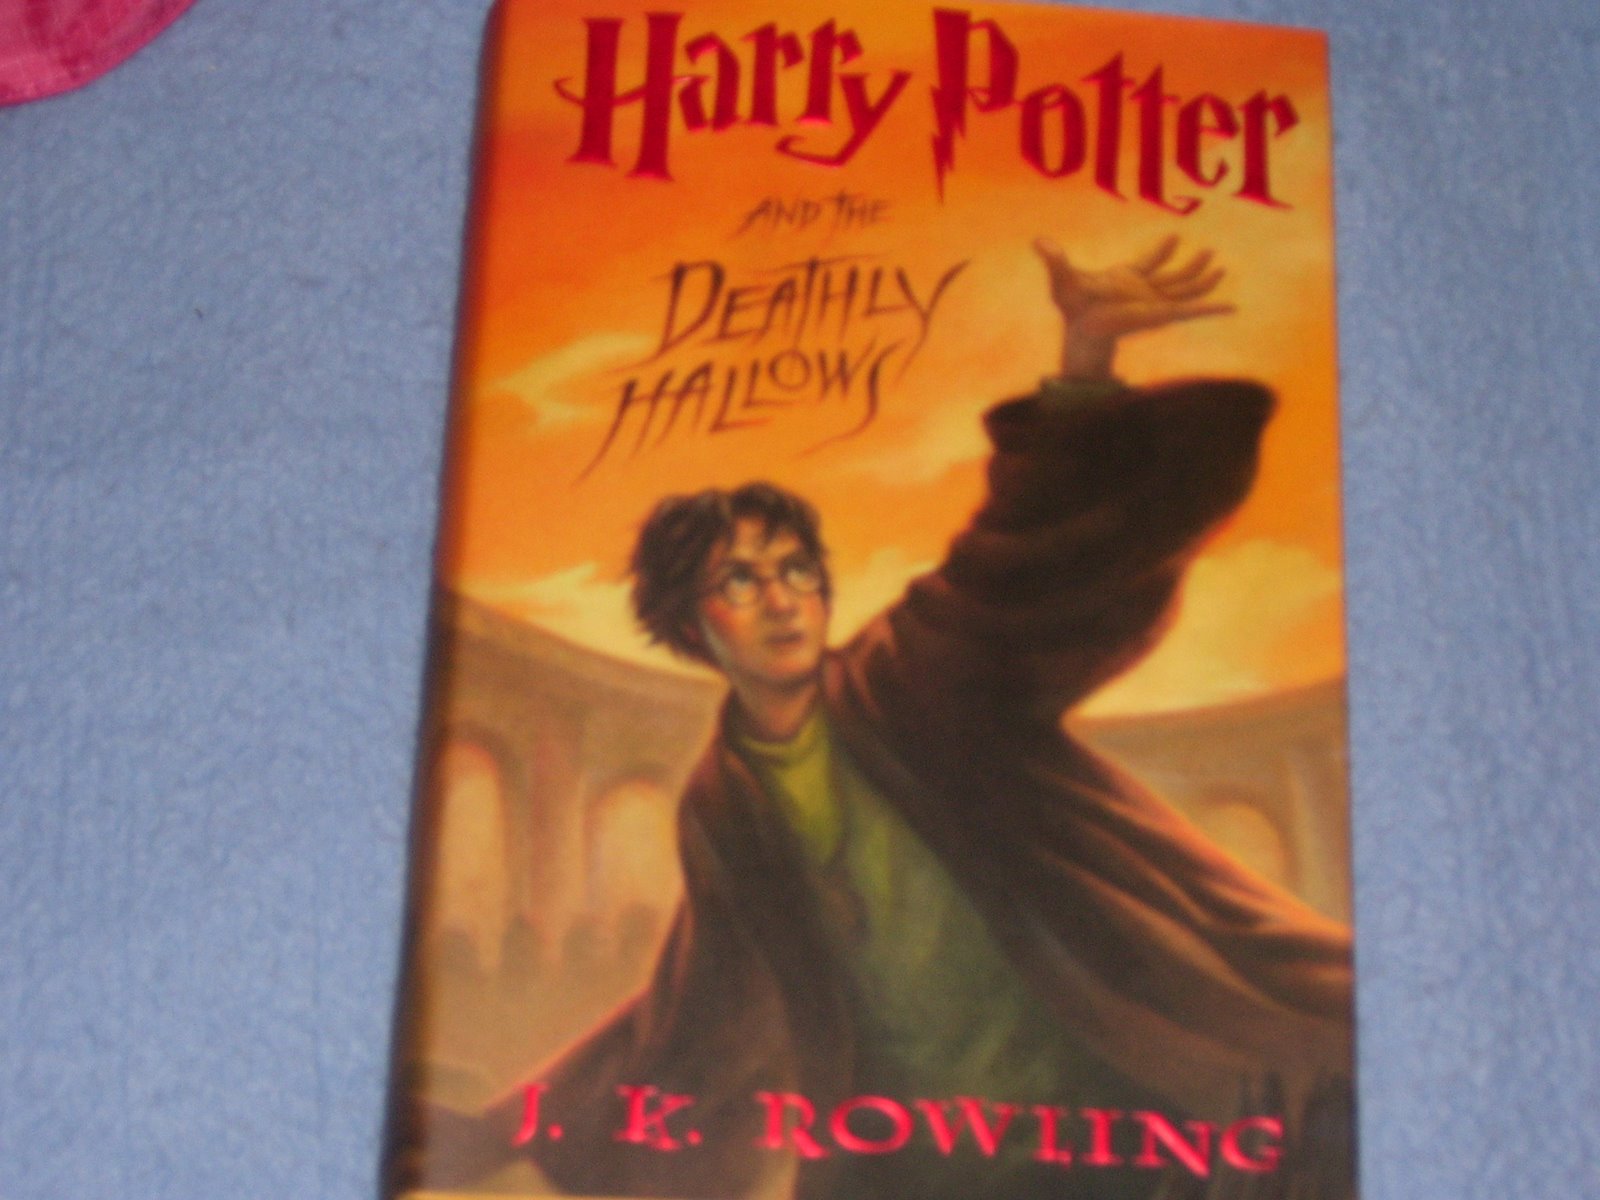 [Harry+Potter+and+the+Deathly+Hallows+020.jpg]